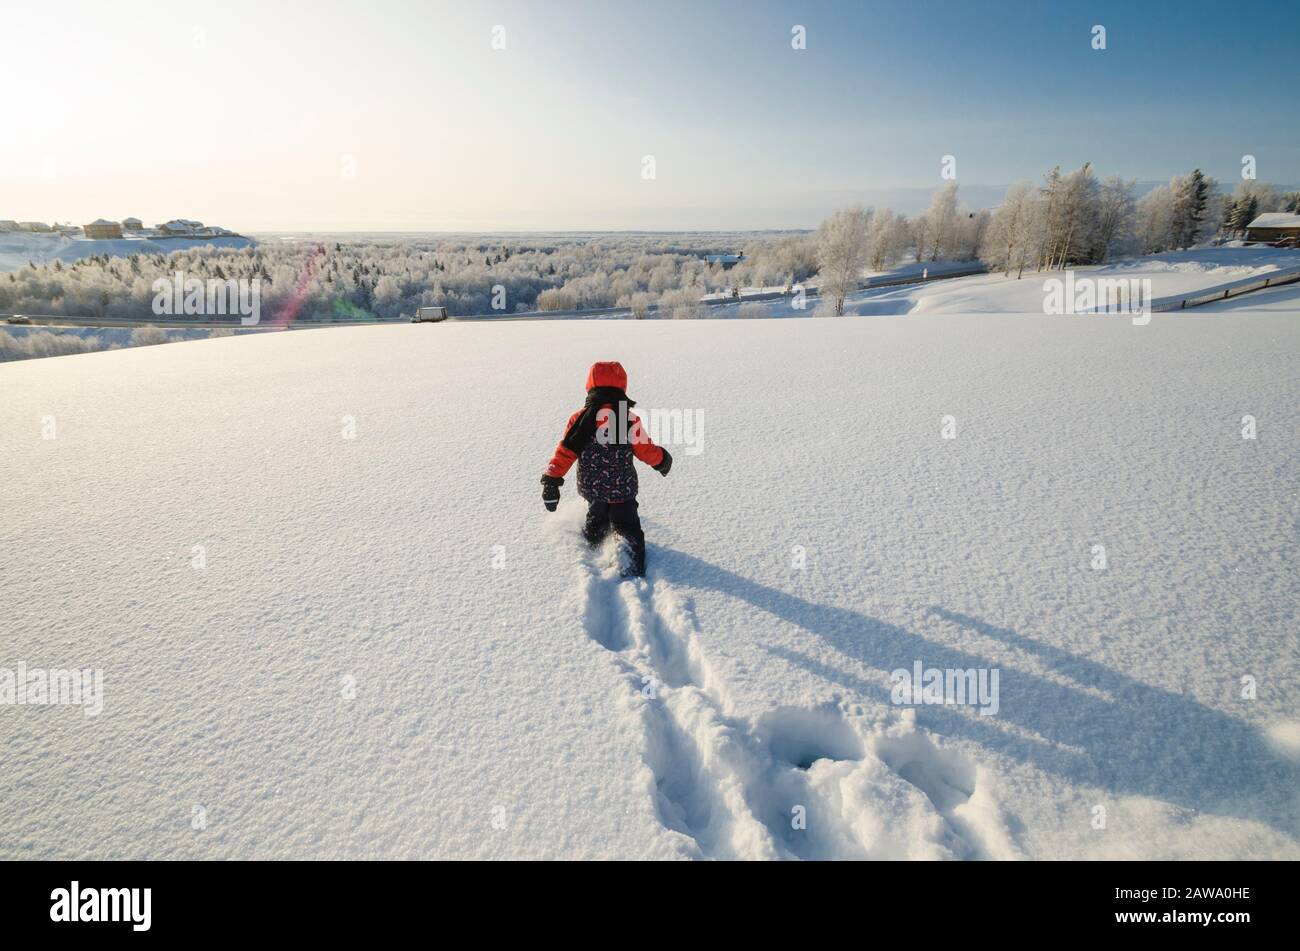 January 2020 - Malye Korely. The kid makes his way through the snowdrifts. Russia, Arkhangelsk region Stock Photo